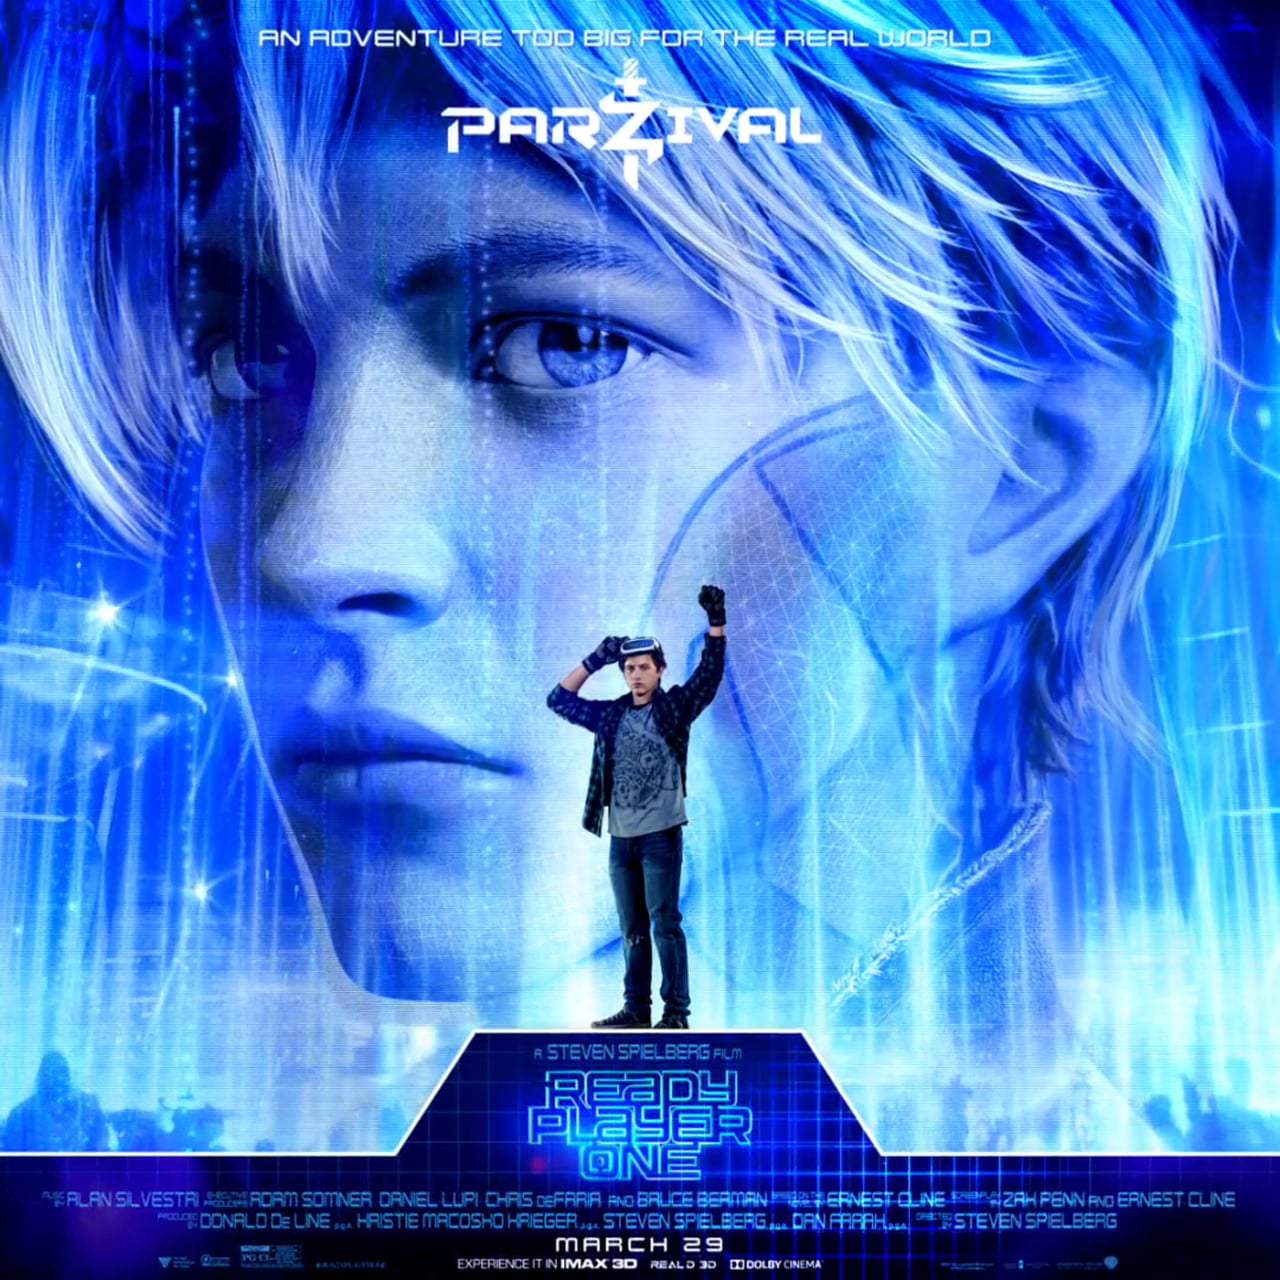 Ready Player One Character Motion Posters (2018) Screen Capture #2